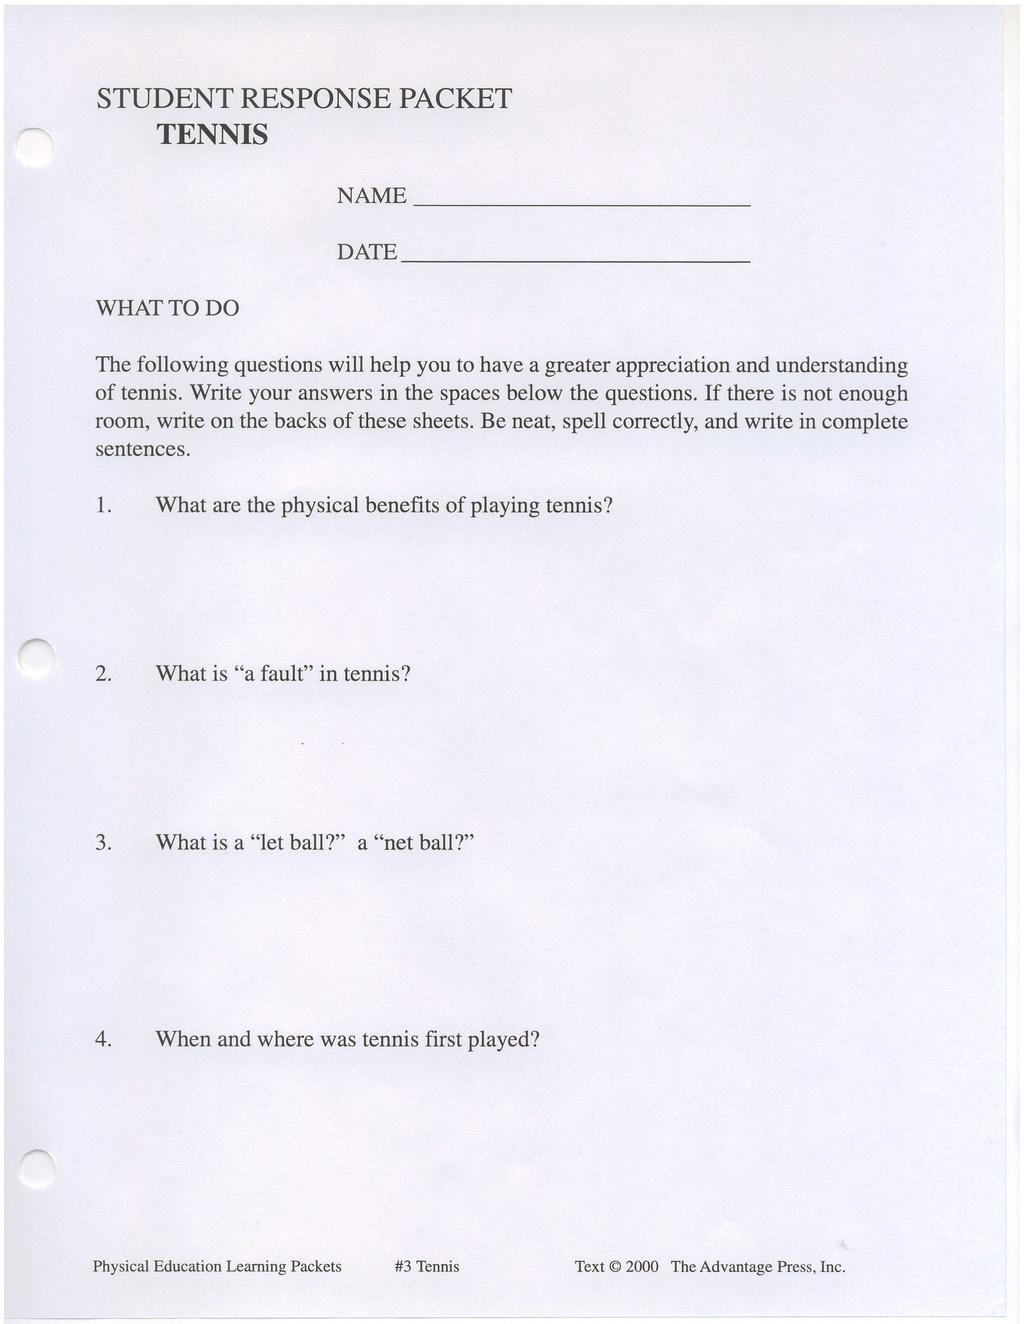 STUDENT RESPONSE PACKET TENNIS WHATTO DO NAME DAIE The fllwing questins will help yu t have a greater appreciatin and understanding f tennis. Write yur answers in the spaces belw the questins.